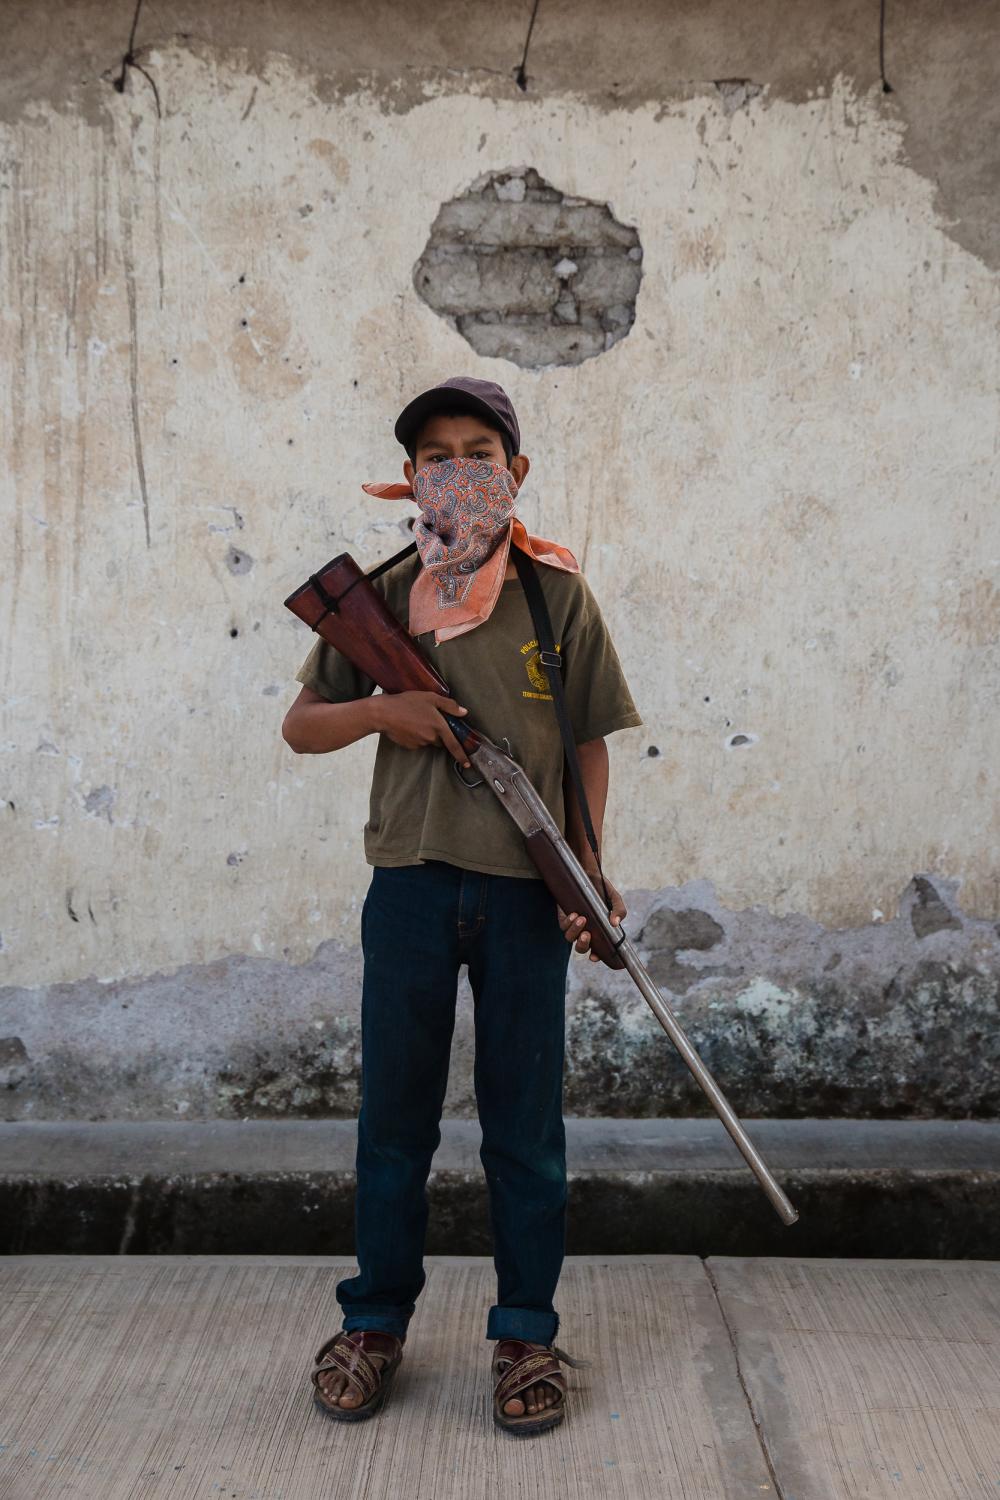 Children in Guerrero Take Up Arms - 